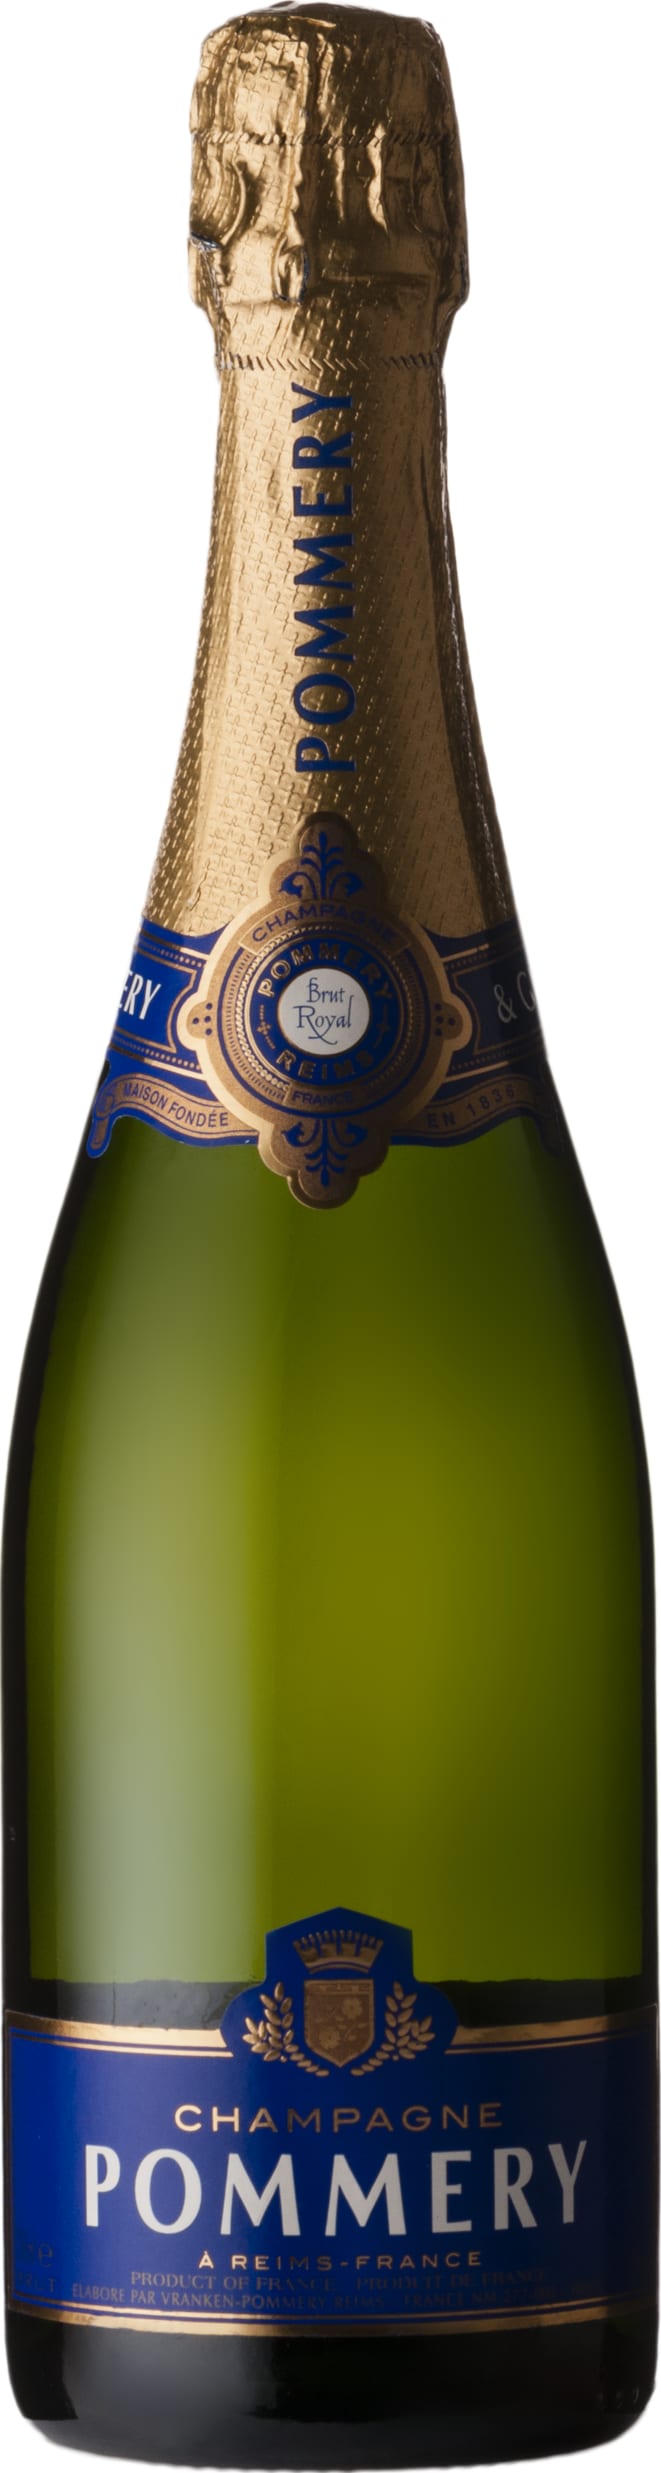 Champagne Pommery Brut Royal 75cl NV - Buy Champagne Pommery Wines from GREAT WINES DIRECT wine shop